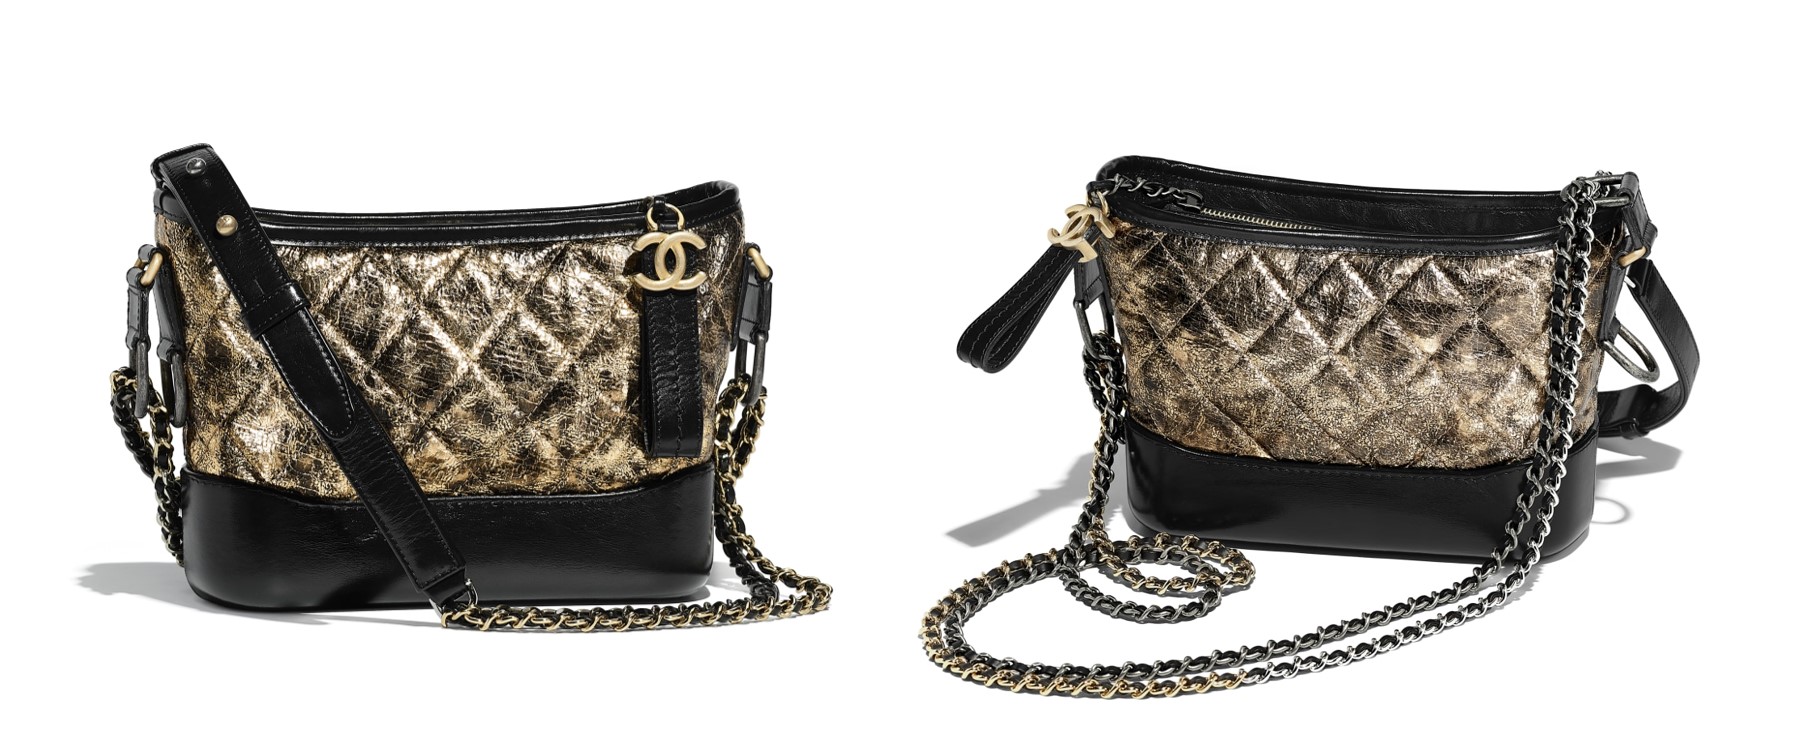 best Chanel bags to buy this season Chanel Gabrielle small hobo bag black and gold